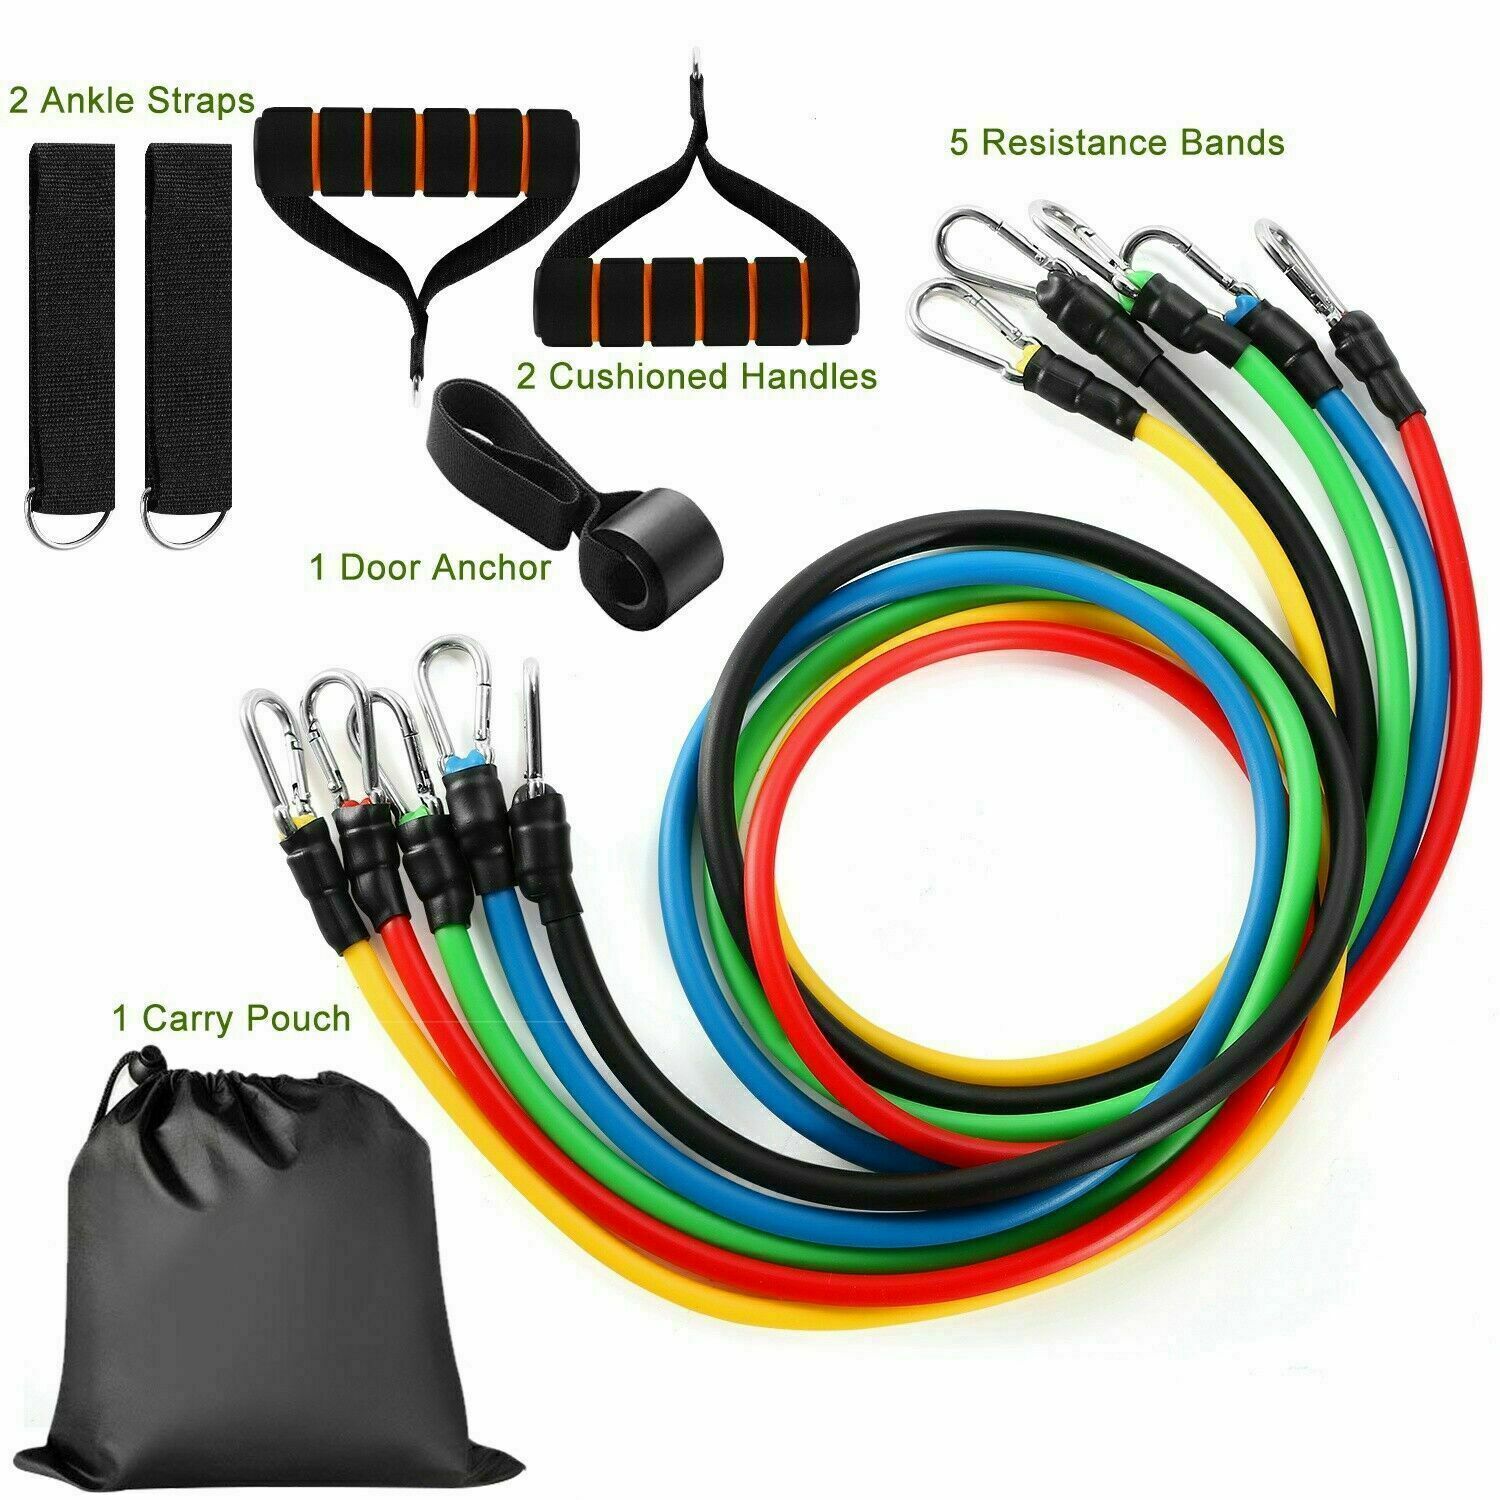 11 Piece Exercise Crossfit Fitness Set Resistance Bands Training 